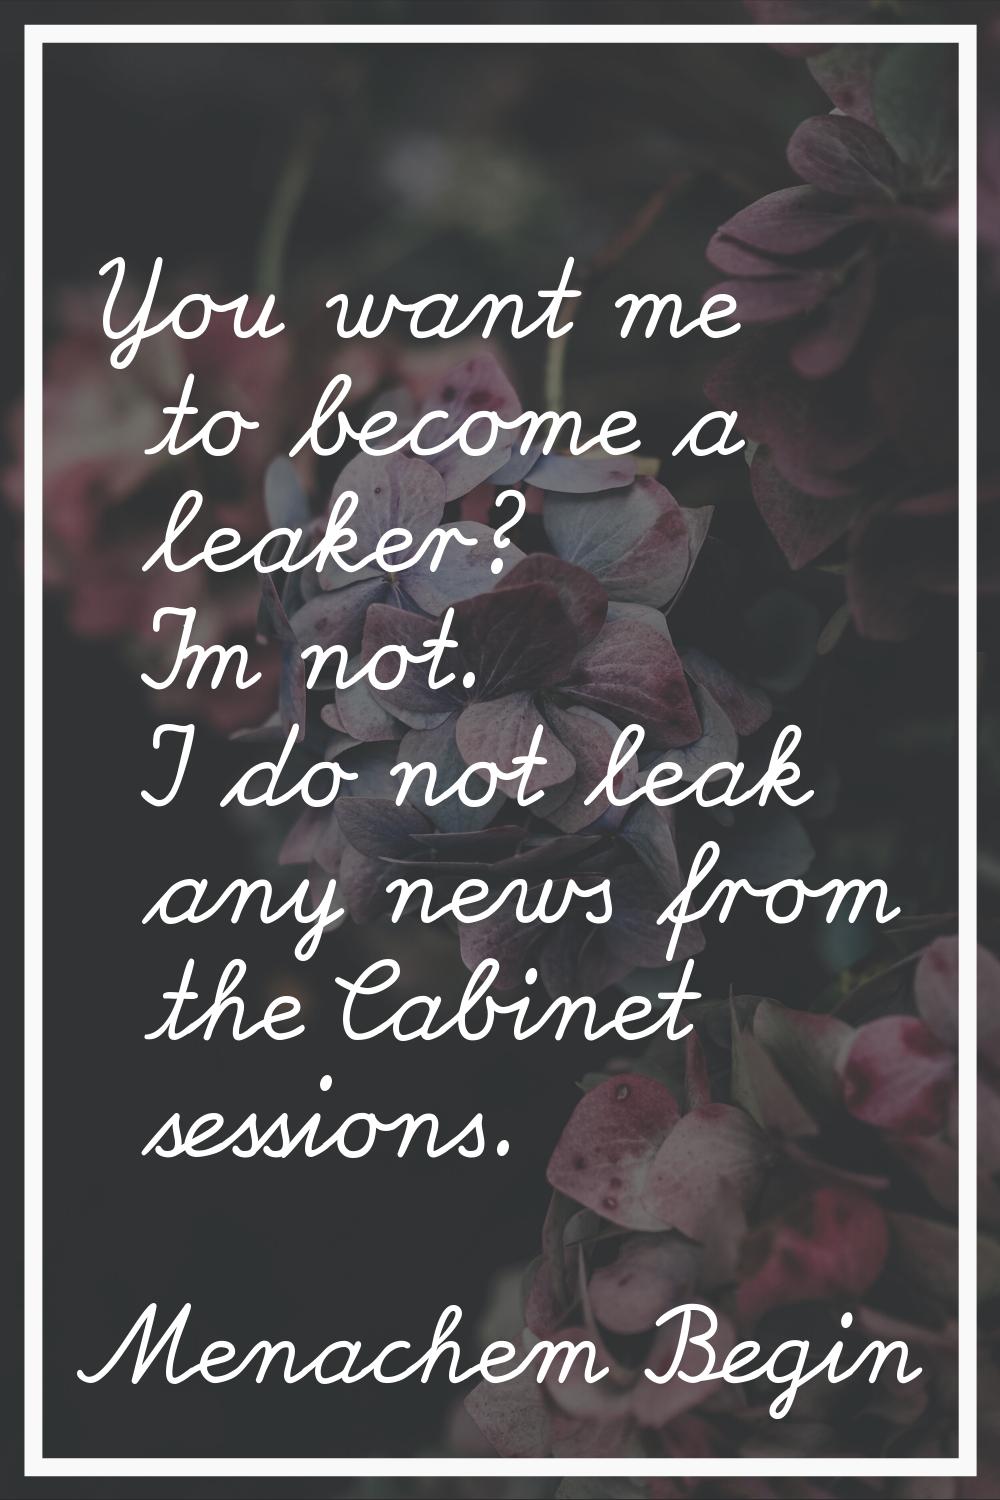 You want me to become a leaker? I'm not. I do not leak any news from the Cabinet sessions.